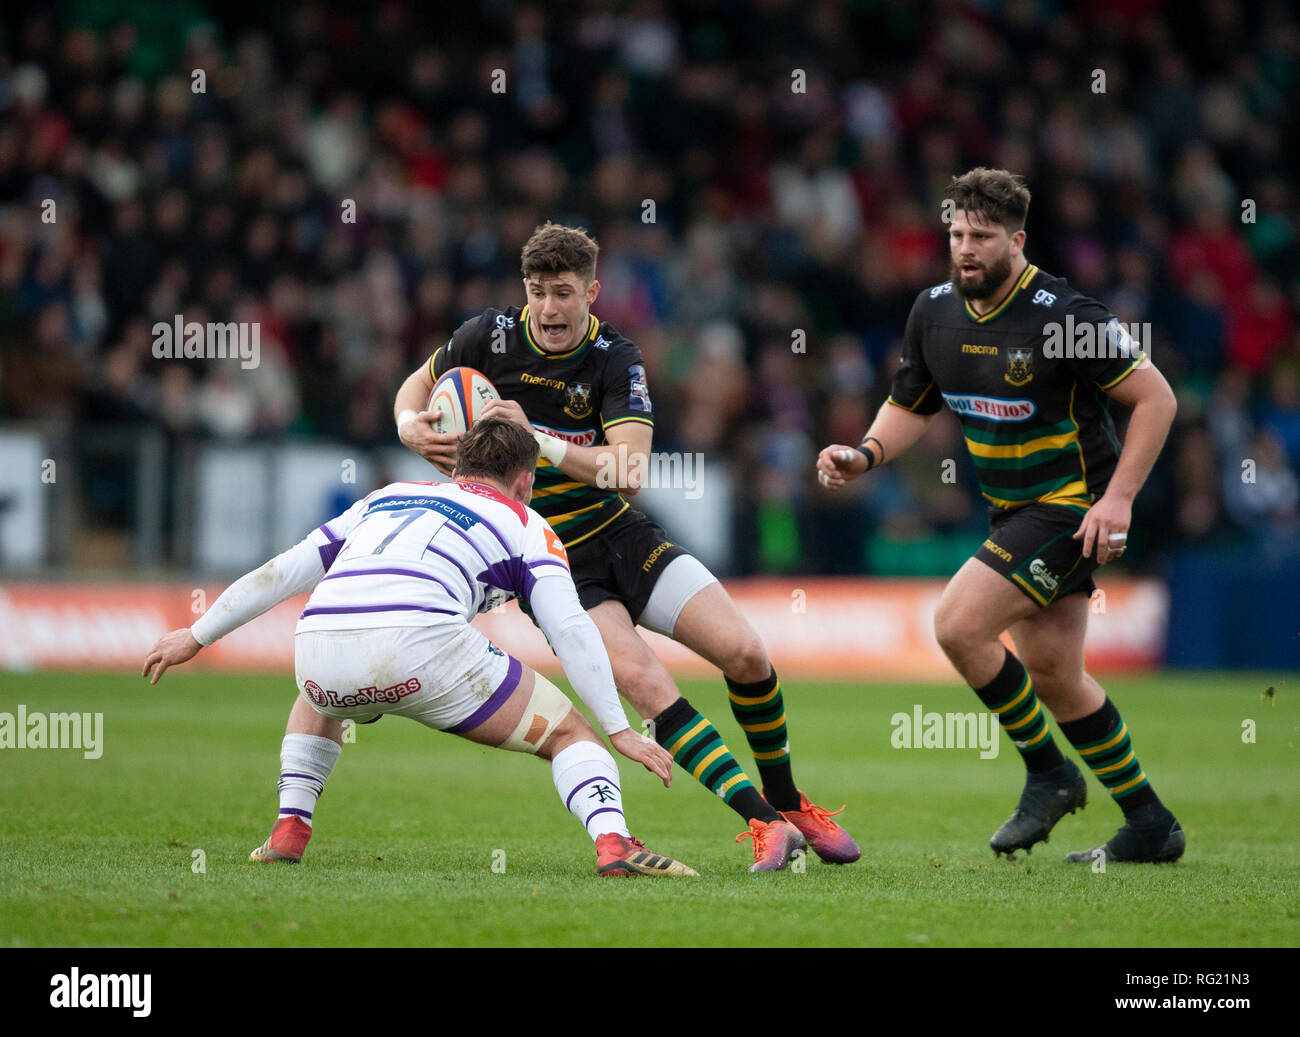 Northampton, UK. 26th January 2019. James Grayson of Northampton Saints runs with the ball during the Premiership Rugby Cup match between Northampton Saints and Leicester Tigers. Andrew Taylor/Alamy Live News Stock Photo